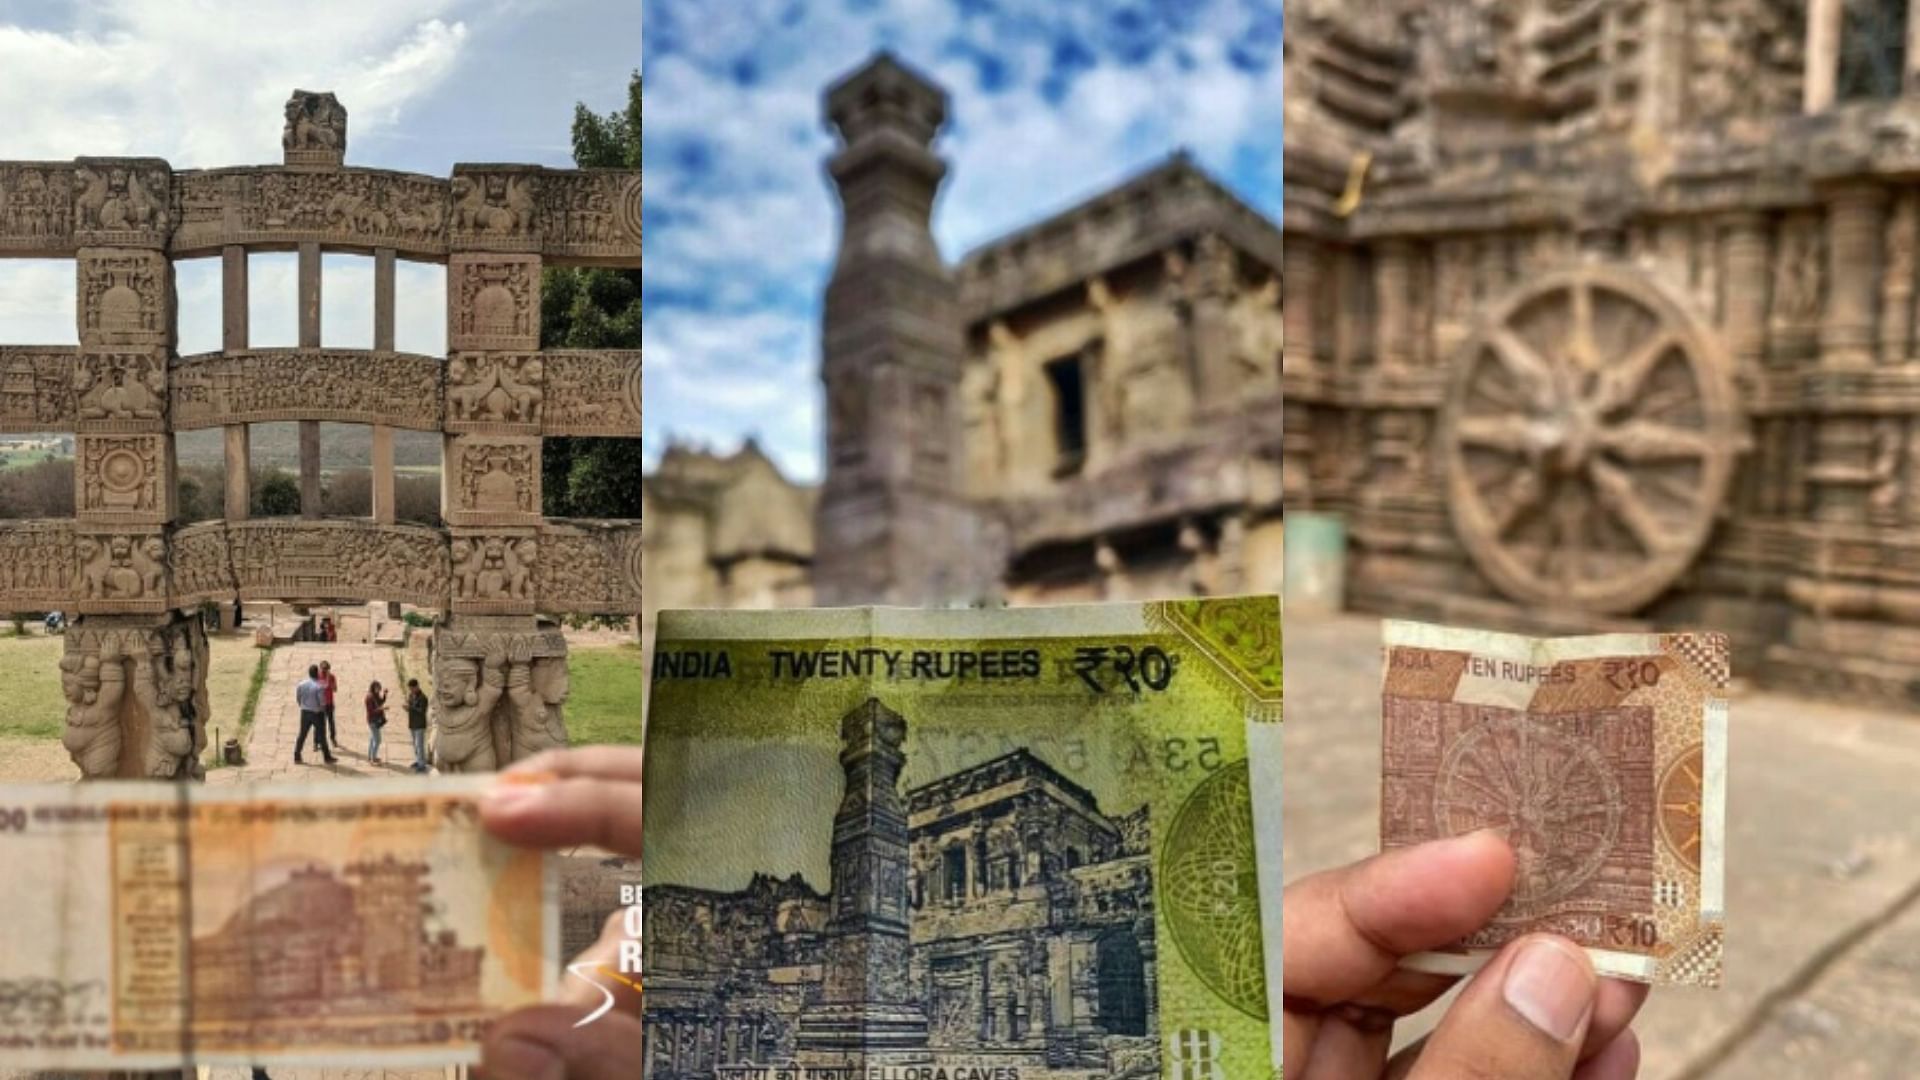 twitter thread historical sites printed on indian currency notes goes viral